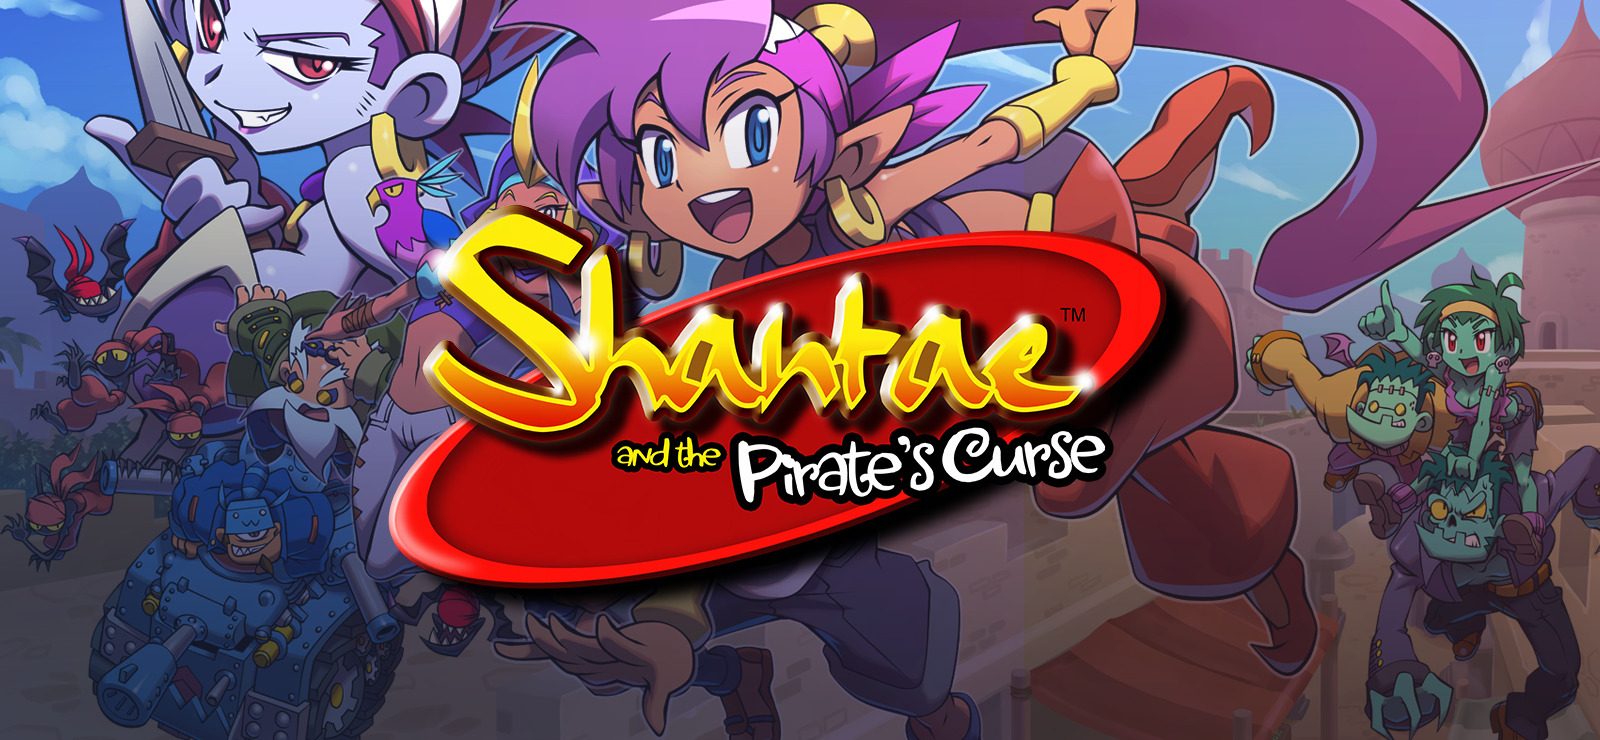 Shantae and the Pirate's Curse Free Download » GOG Unlocked